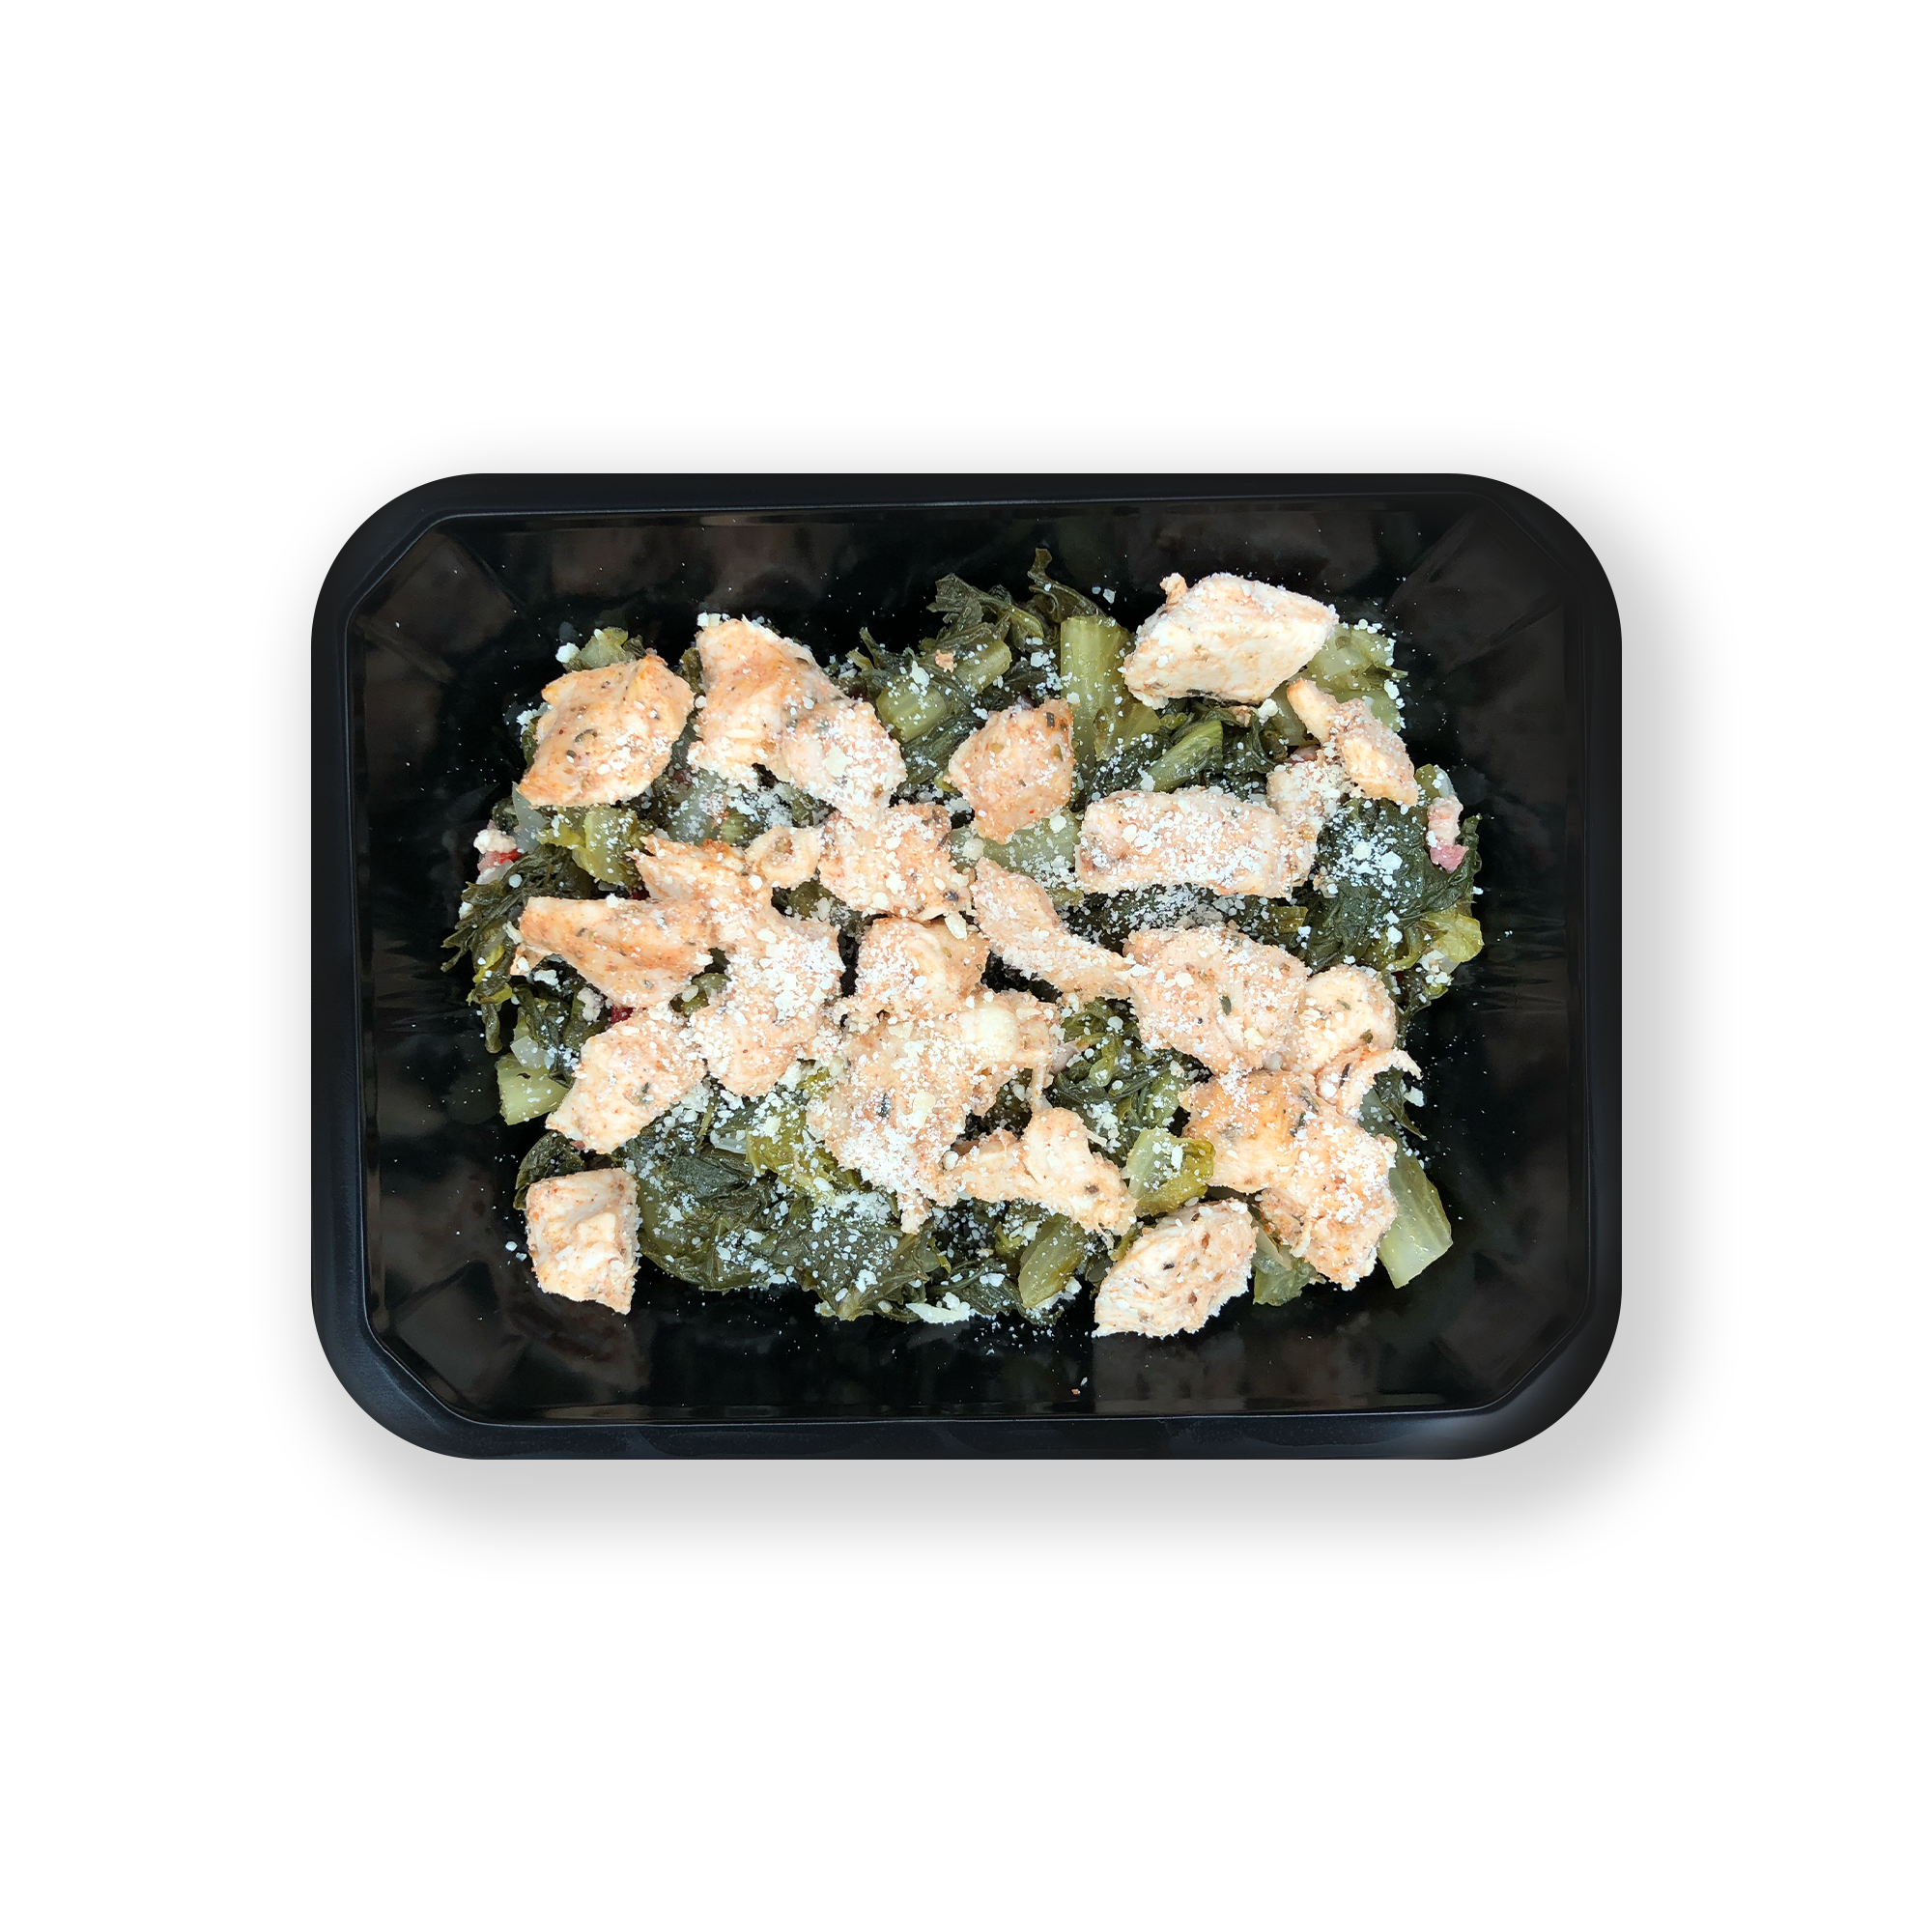 What's included in Chicken & Greens